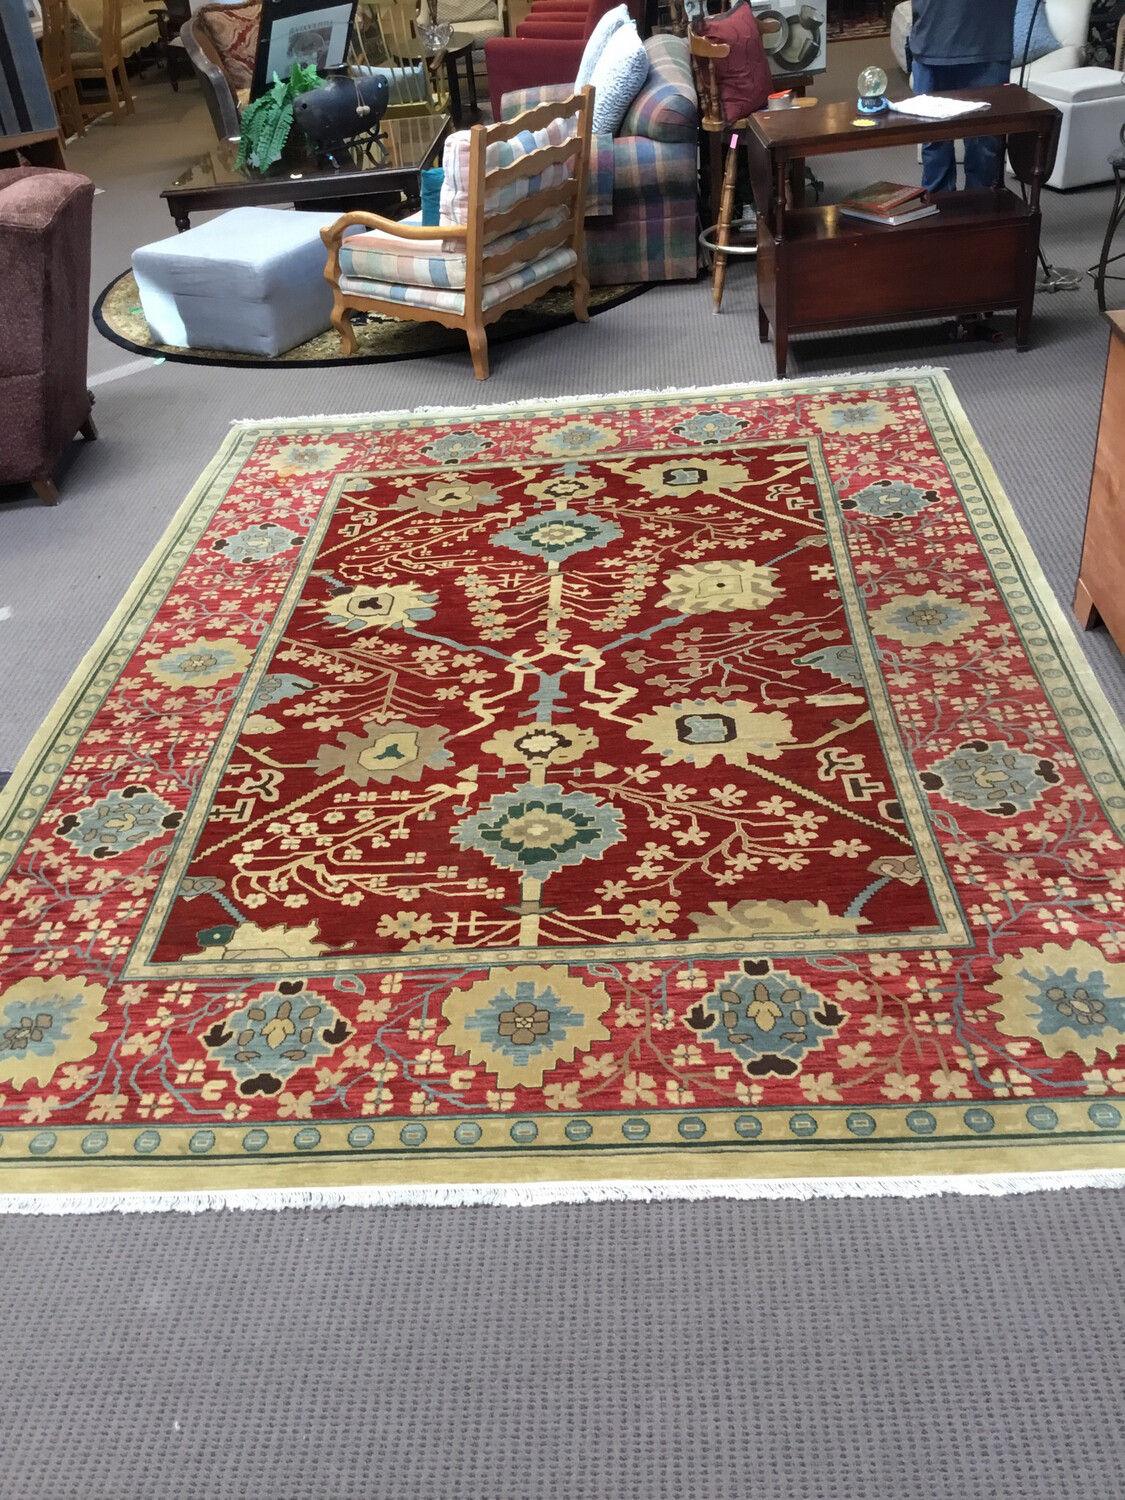 Obetee Hand Made Indian Rug